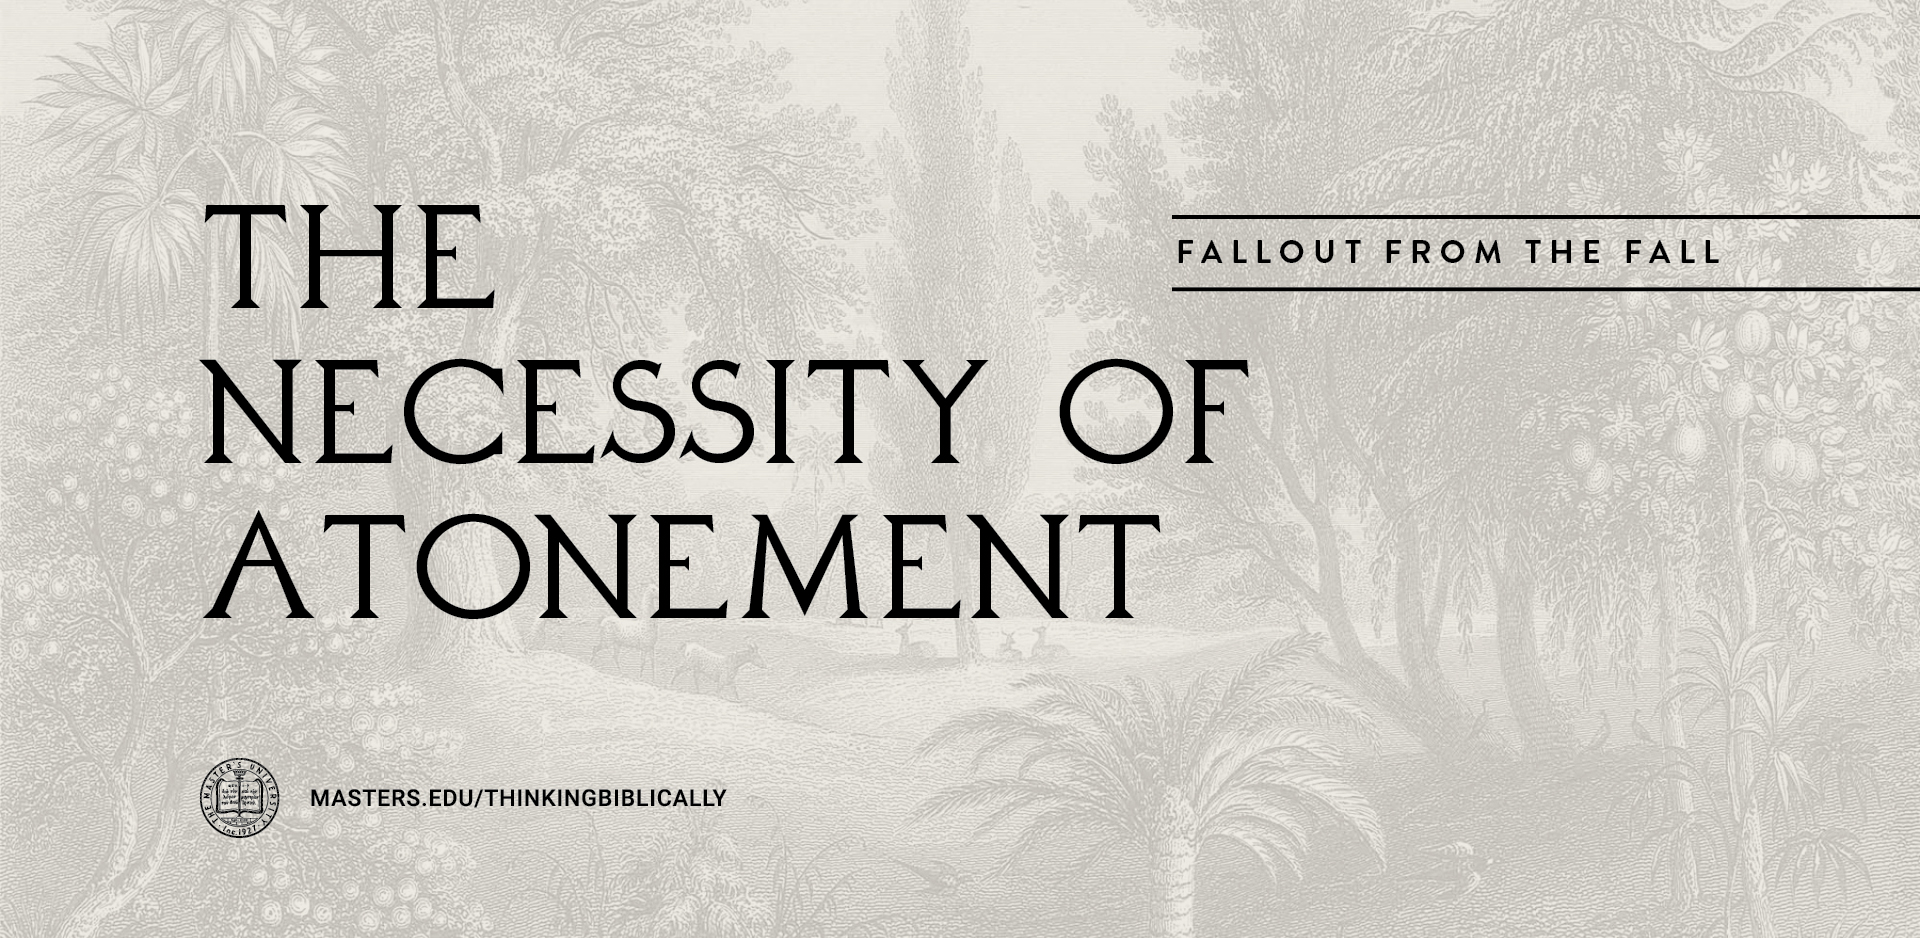 The Necessity of Atonement Featured Image